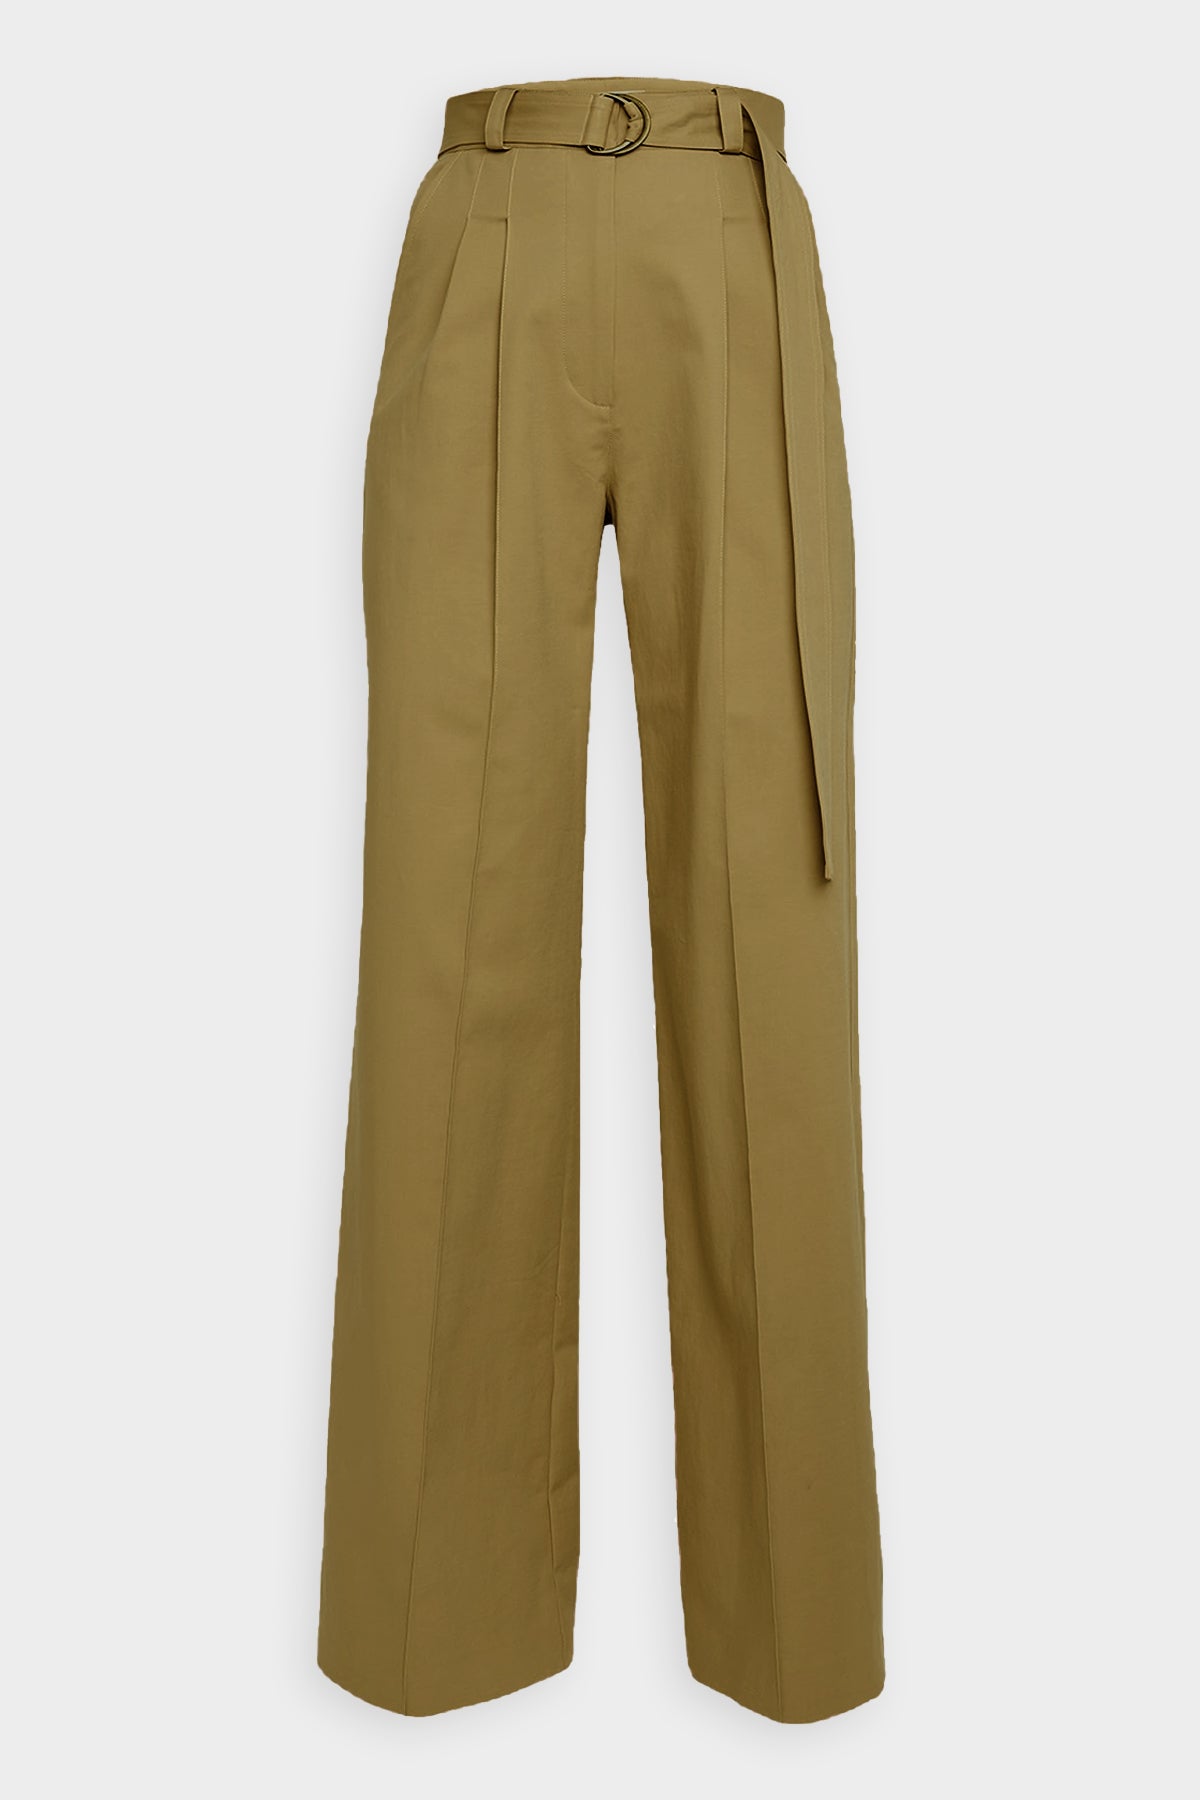 Nico Pant in Willow - shop-olivia.com